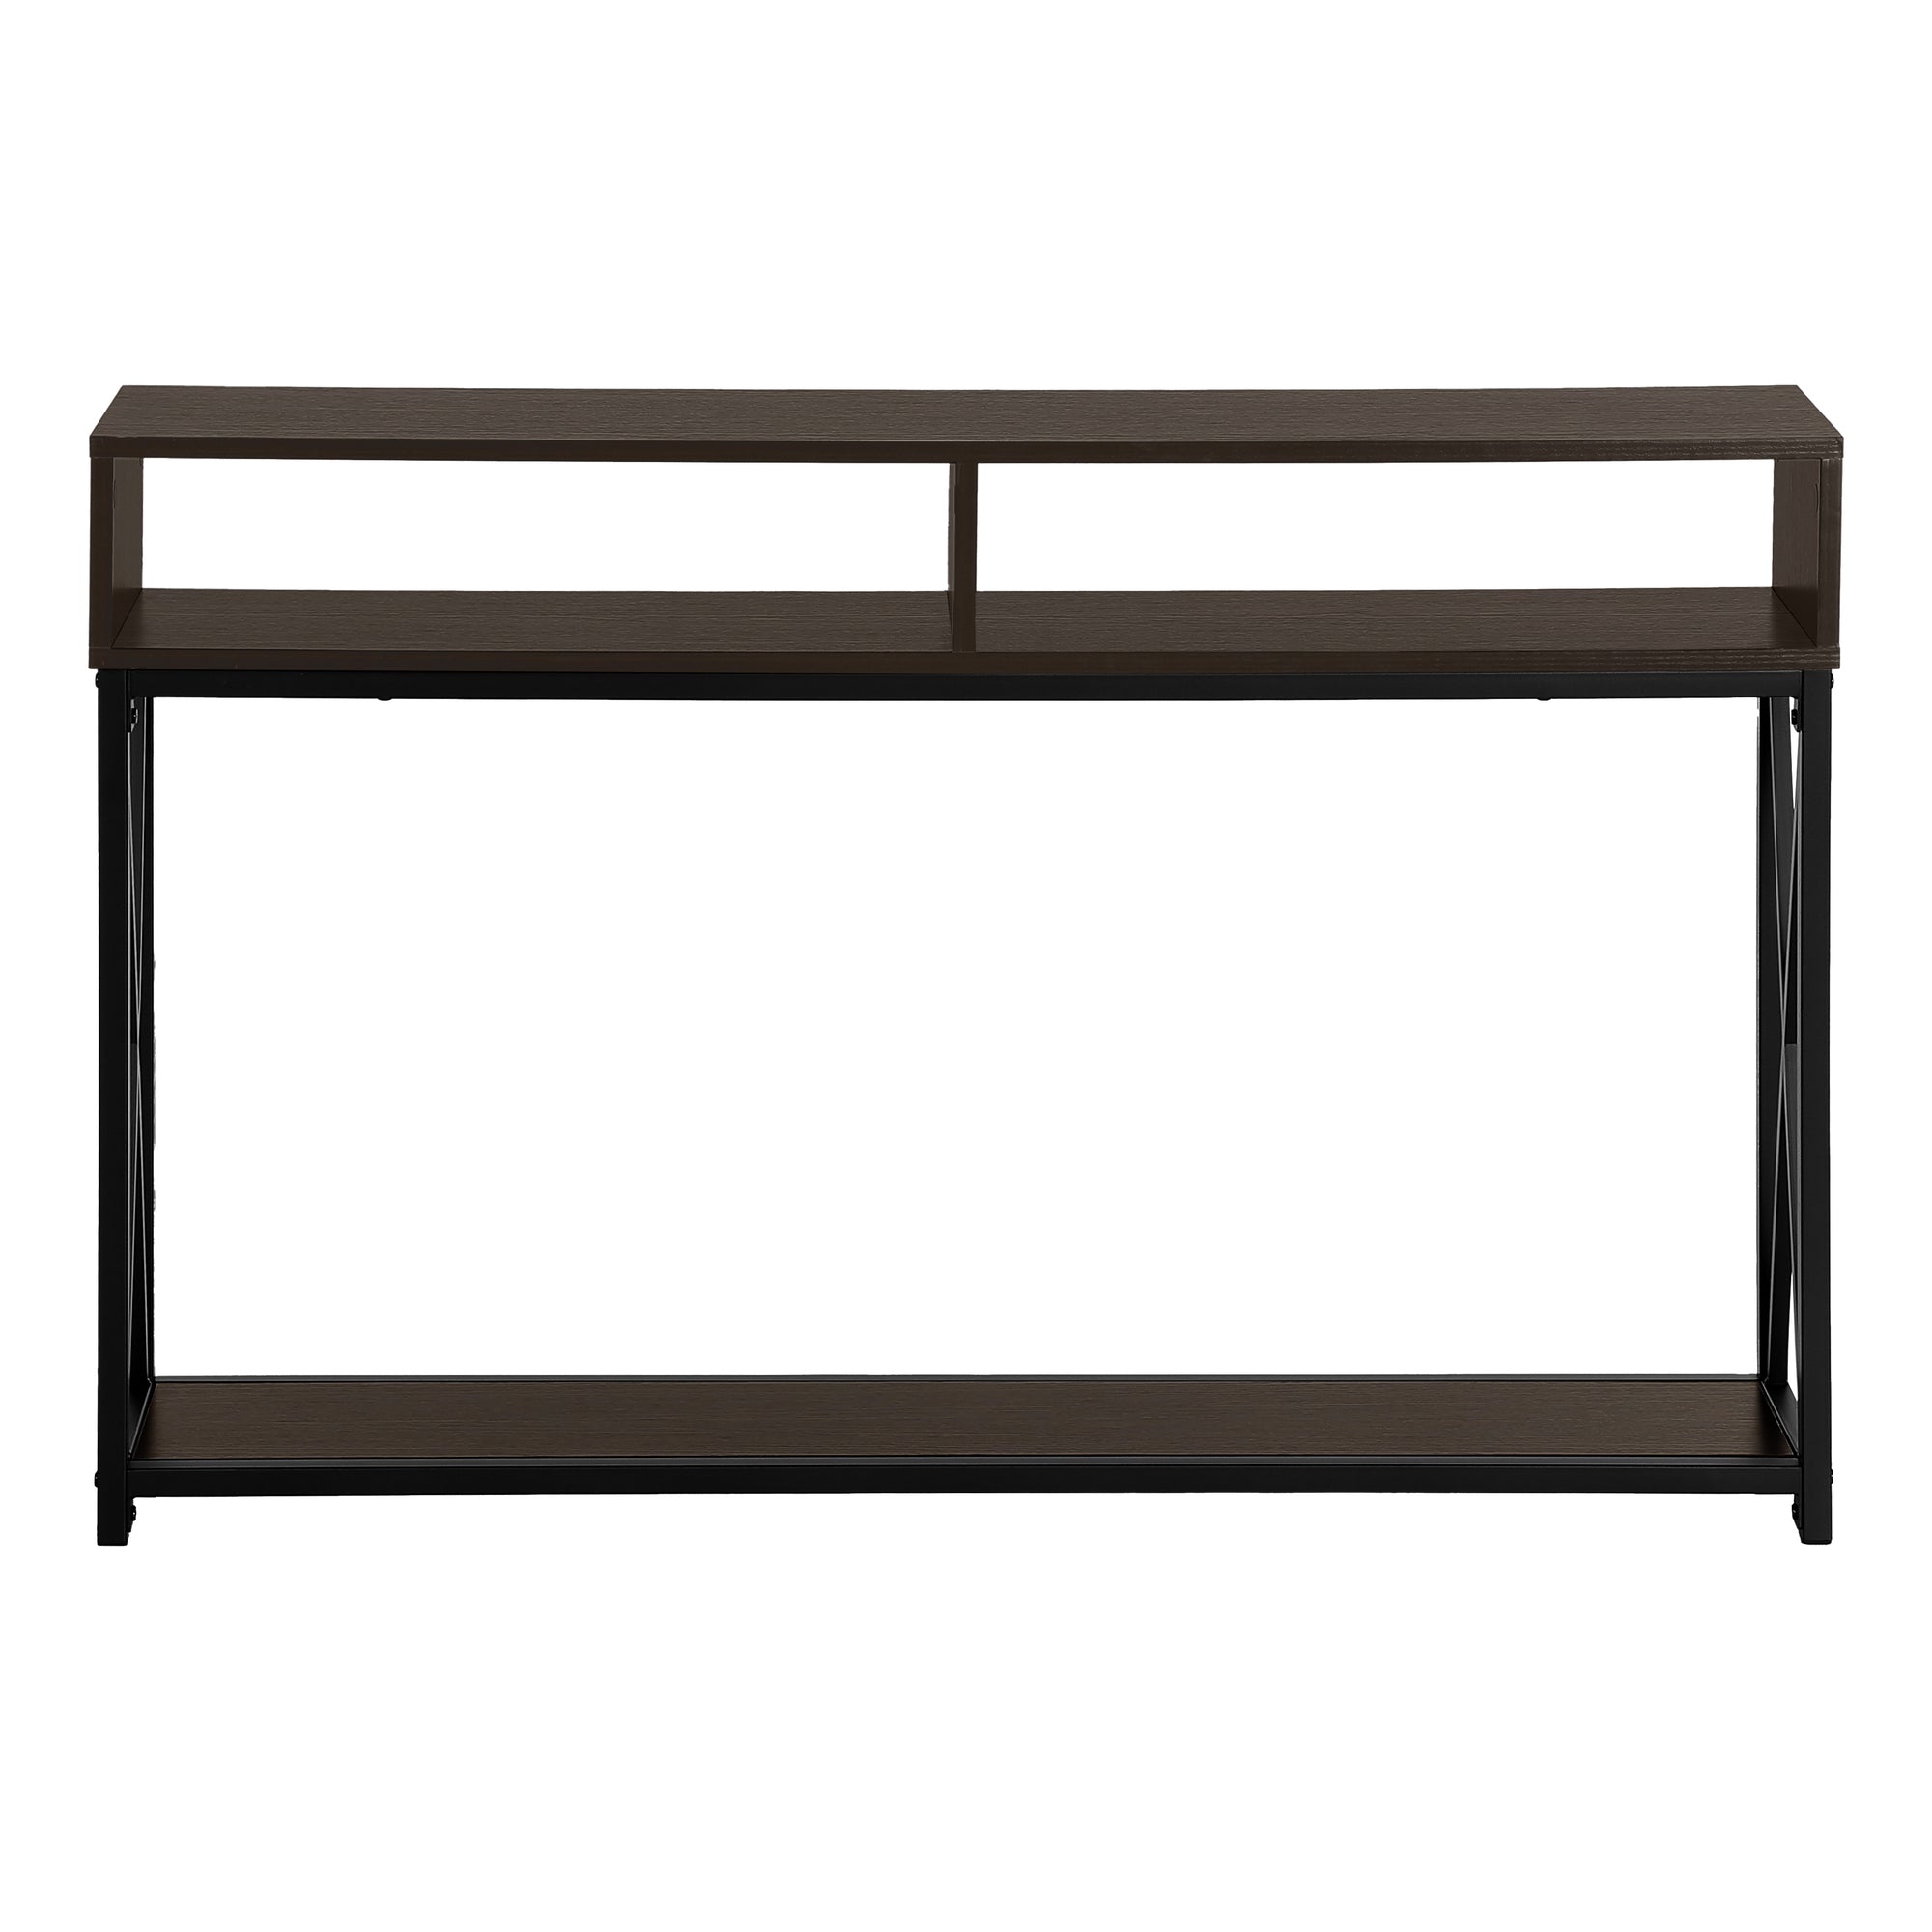 MN-383574    Accent Table, Console, Entryway, Narrow, Sofa, Living Room, Bedroom, Metal Frame, Laminate, Dark Brown, Black, Contemporary, Modern